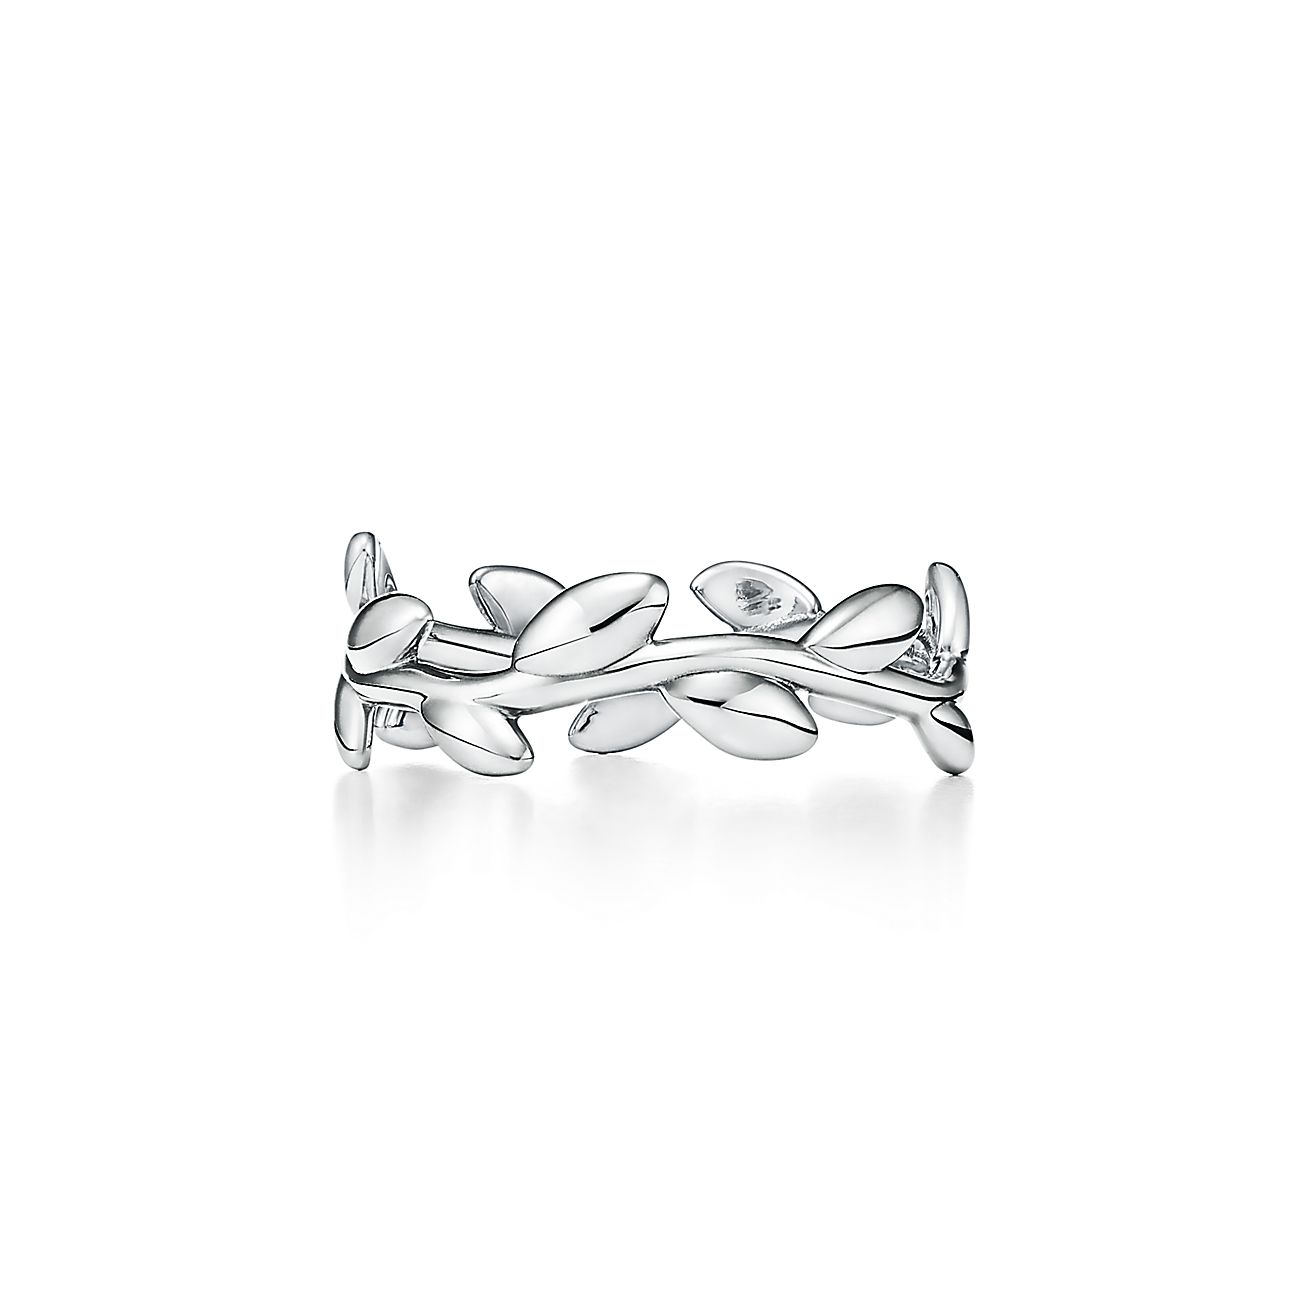 Danser Fantastisch Opvoeding Paloma Picasso® Olive Leaf Band Ring in Silver, Narrow | Tiffany & Co.